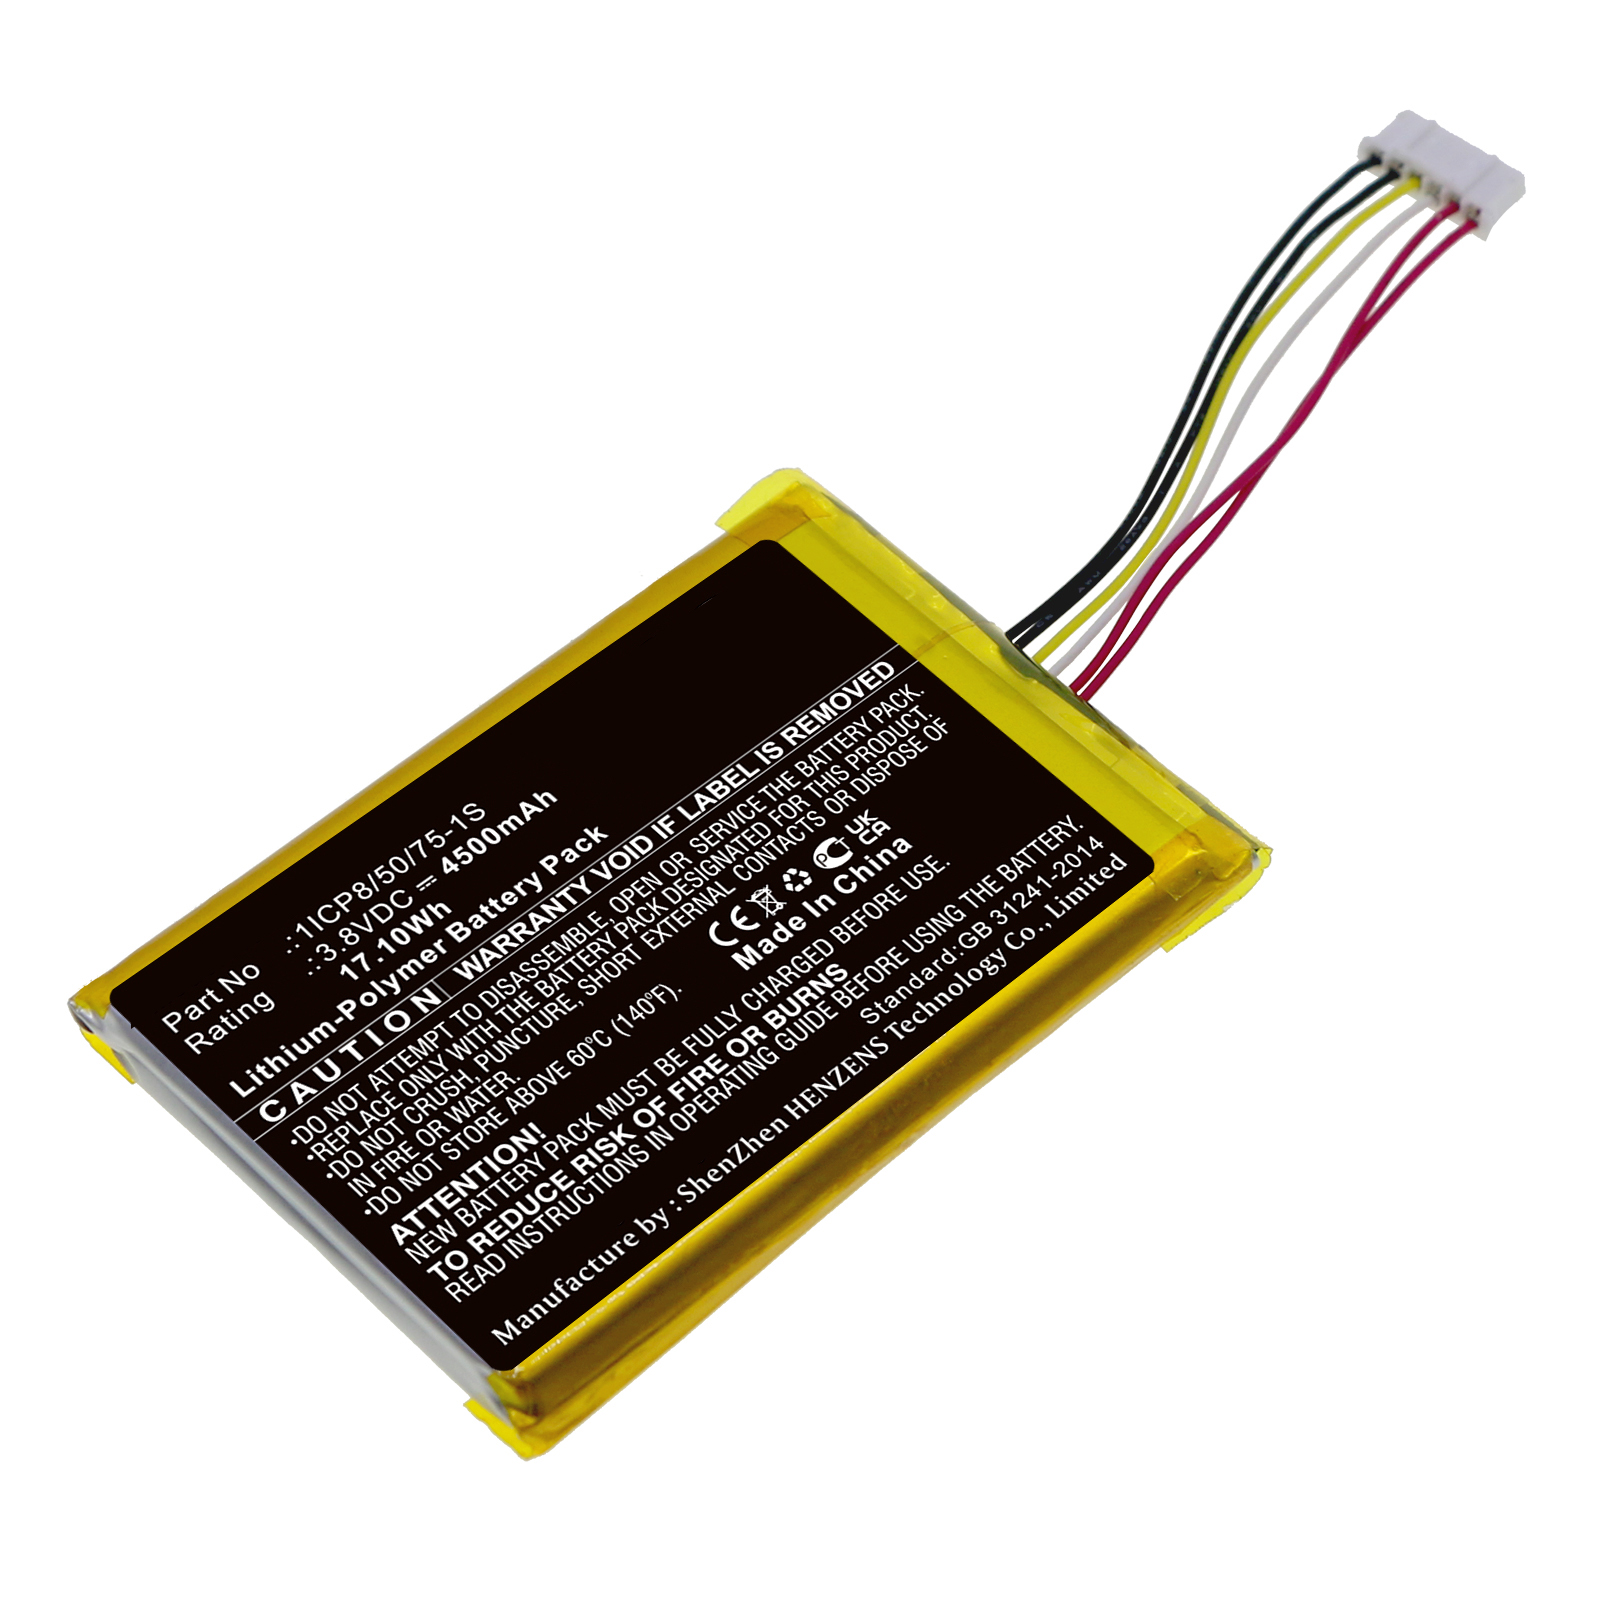 Batteries for LaunchTablet